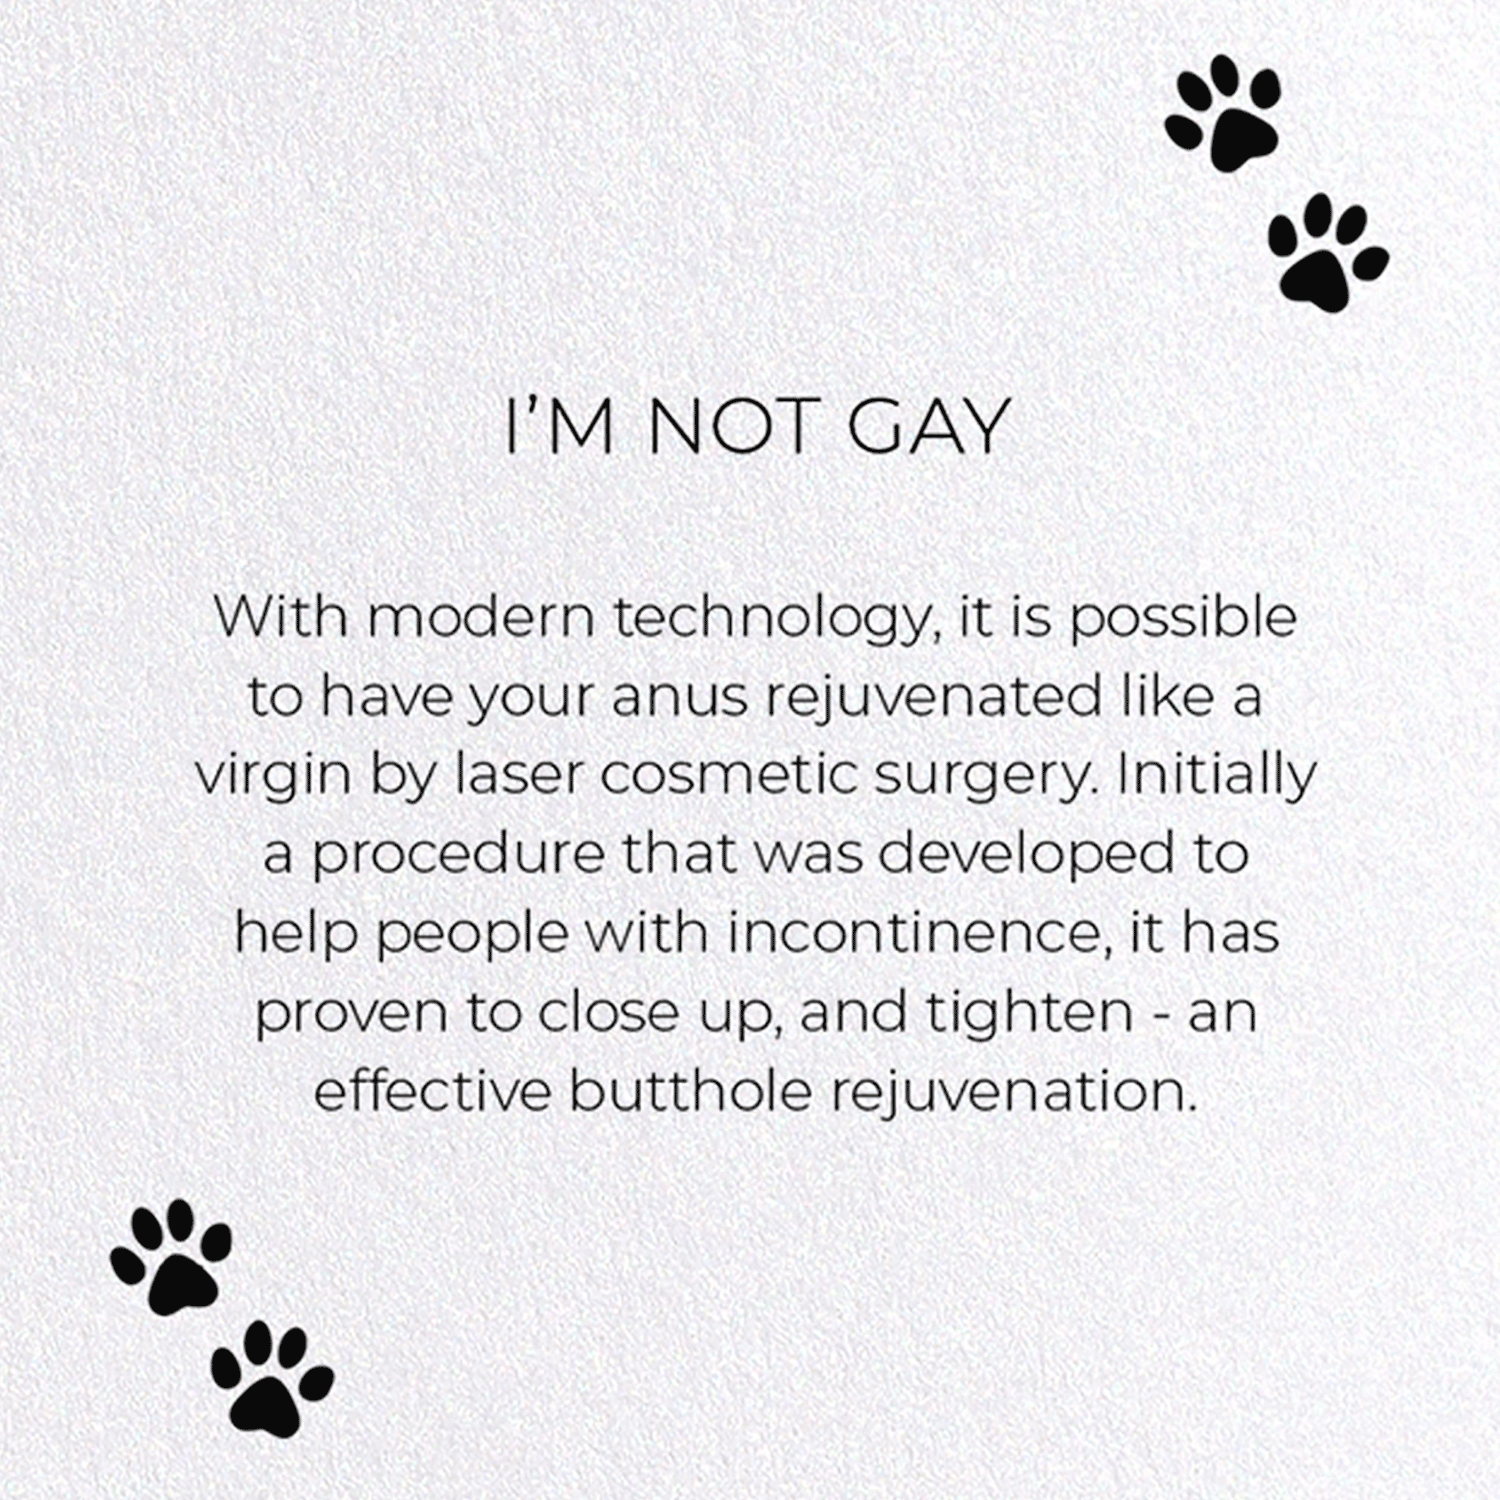 I'M NOT GAY: Funny Animal Greeting Card